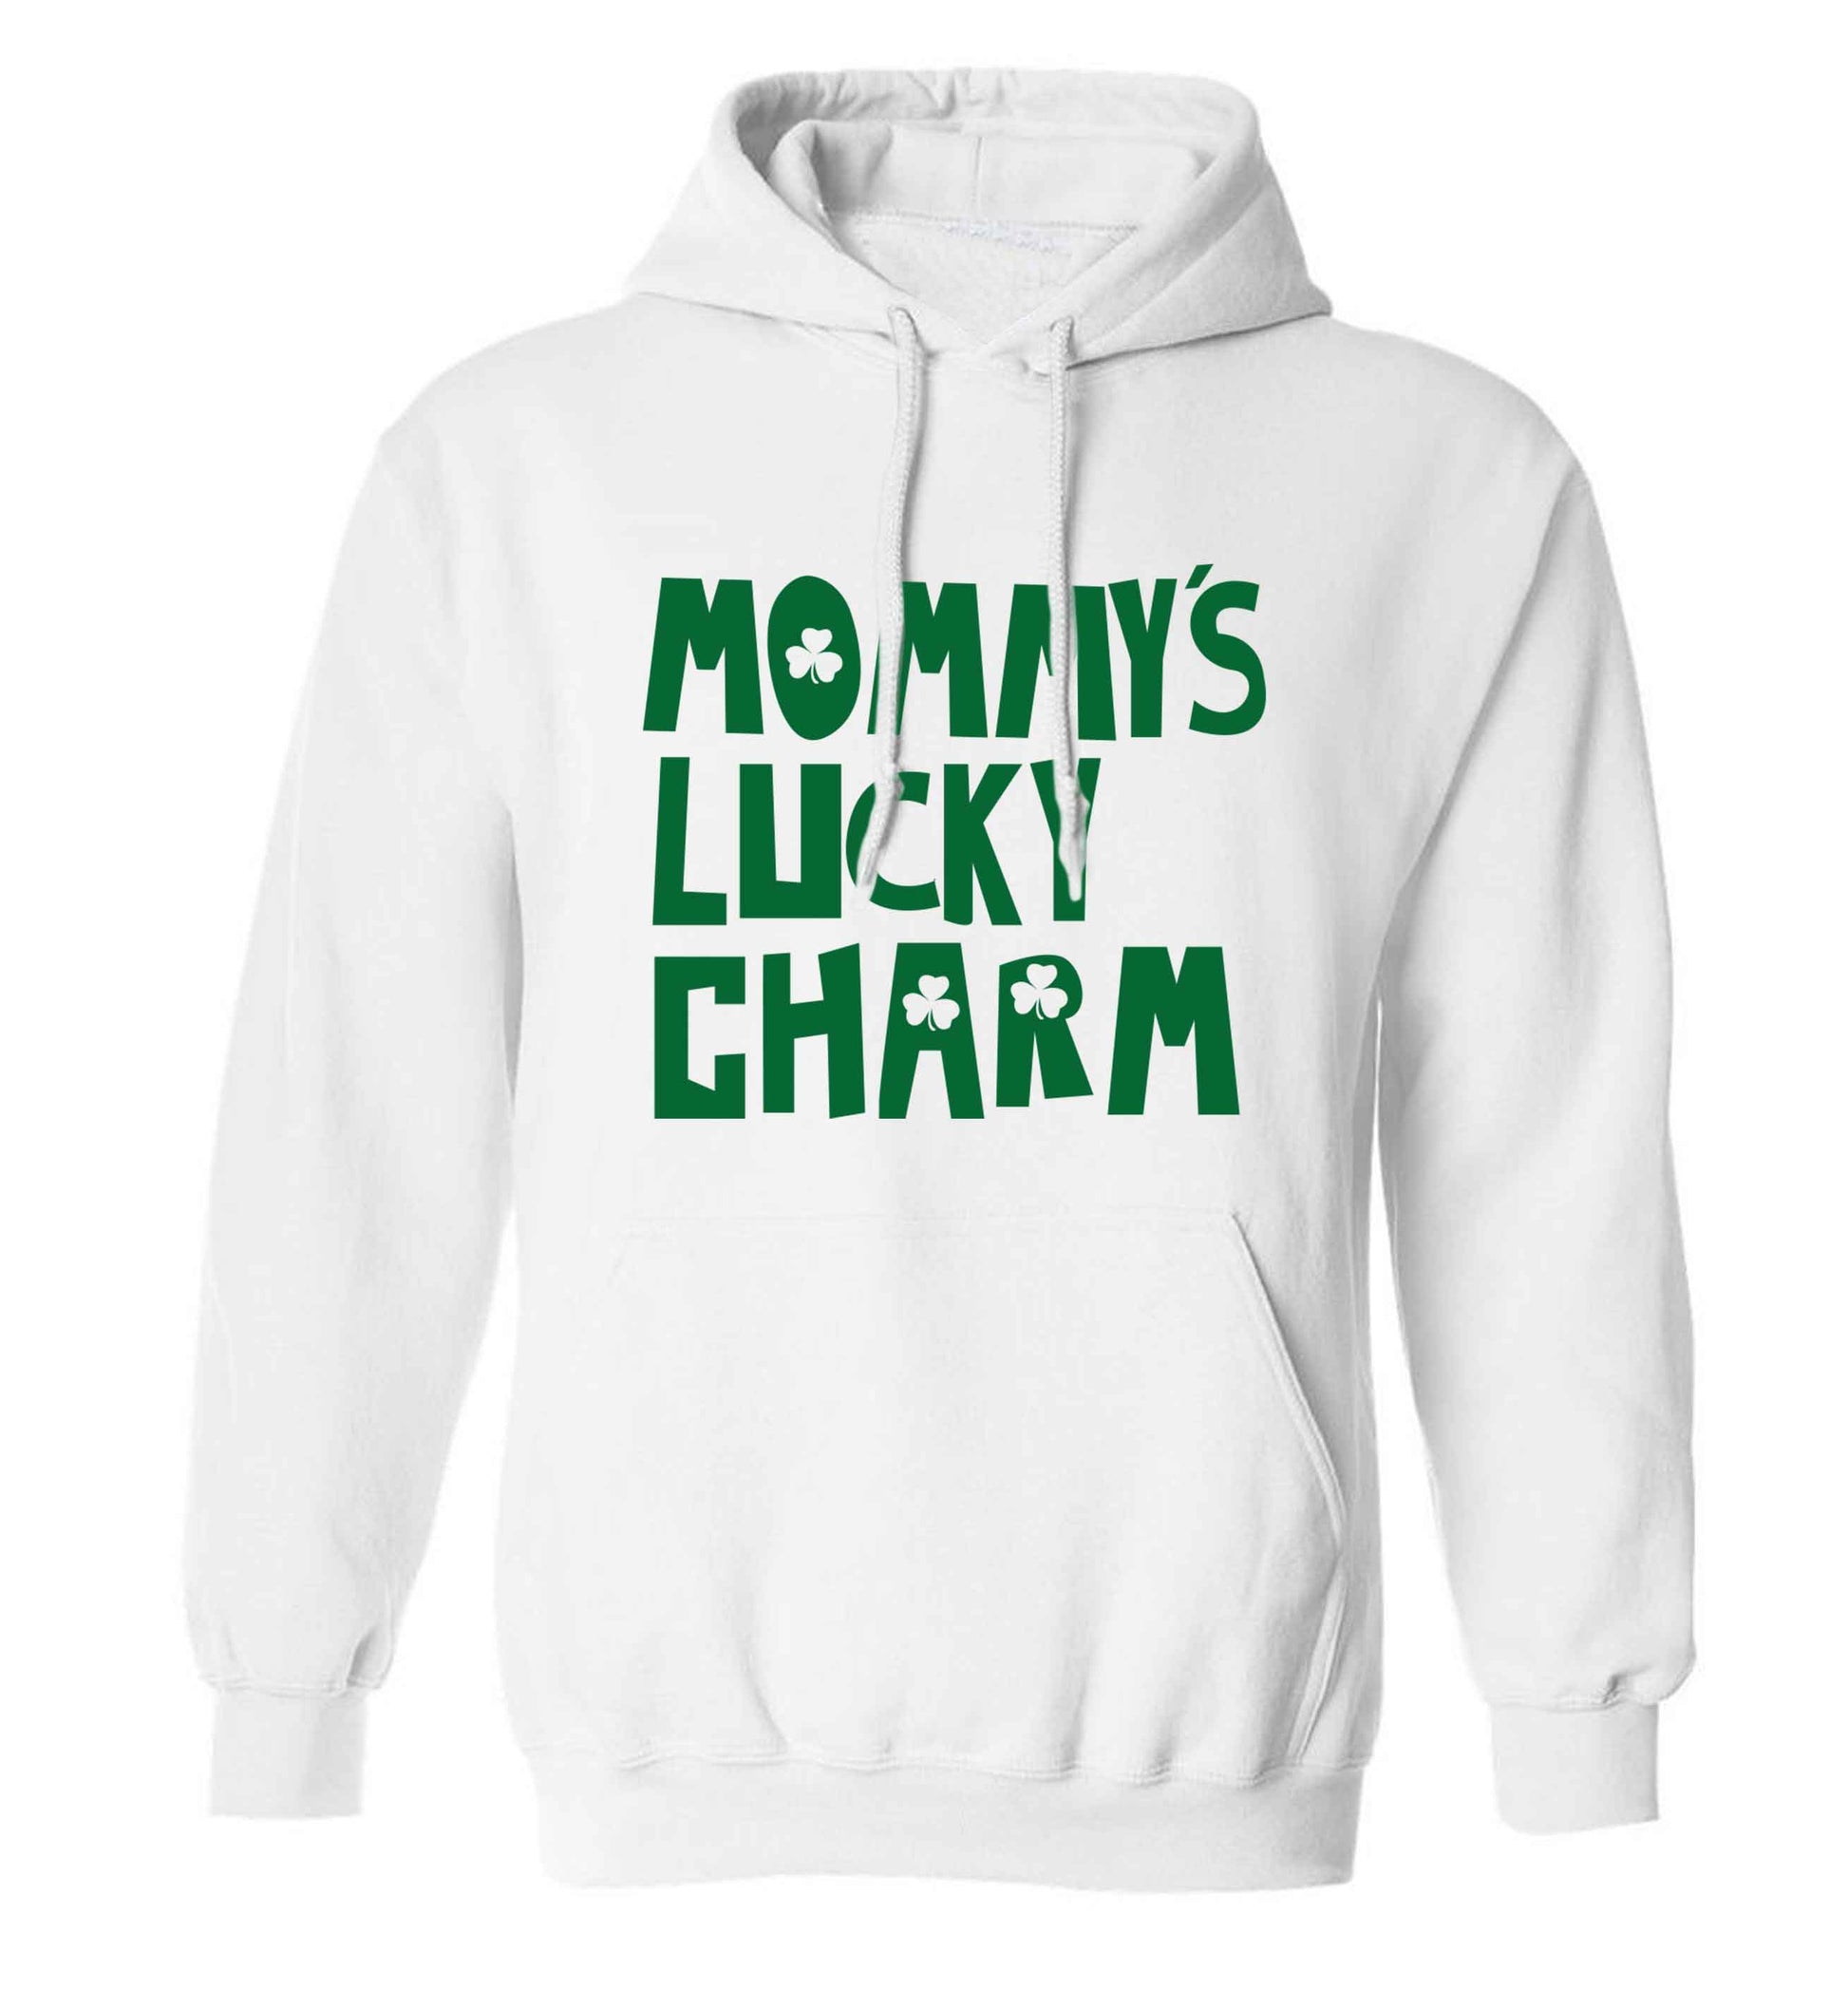 Mommy's lucky charm adults unisex white hoodie 2XL